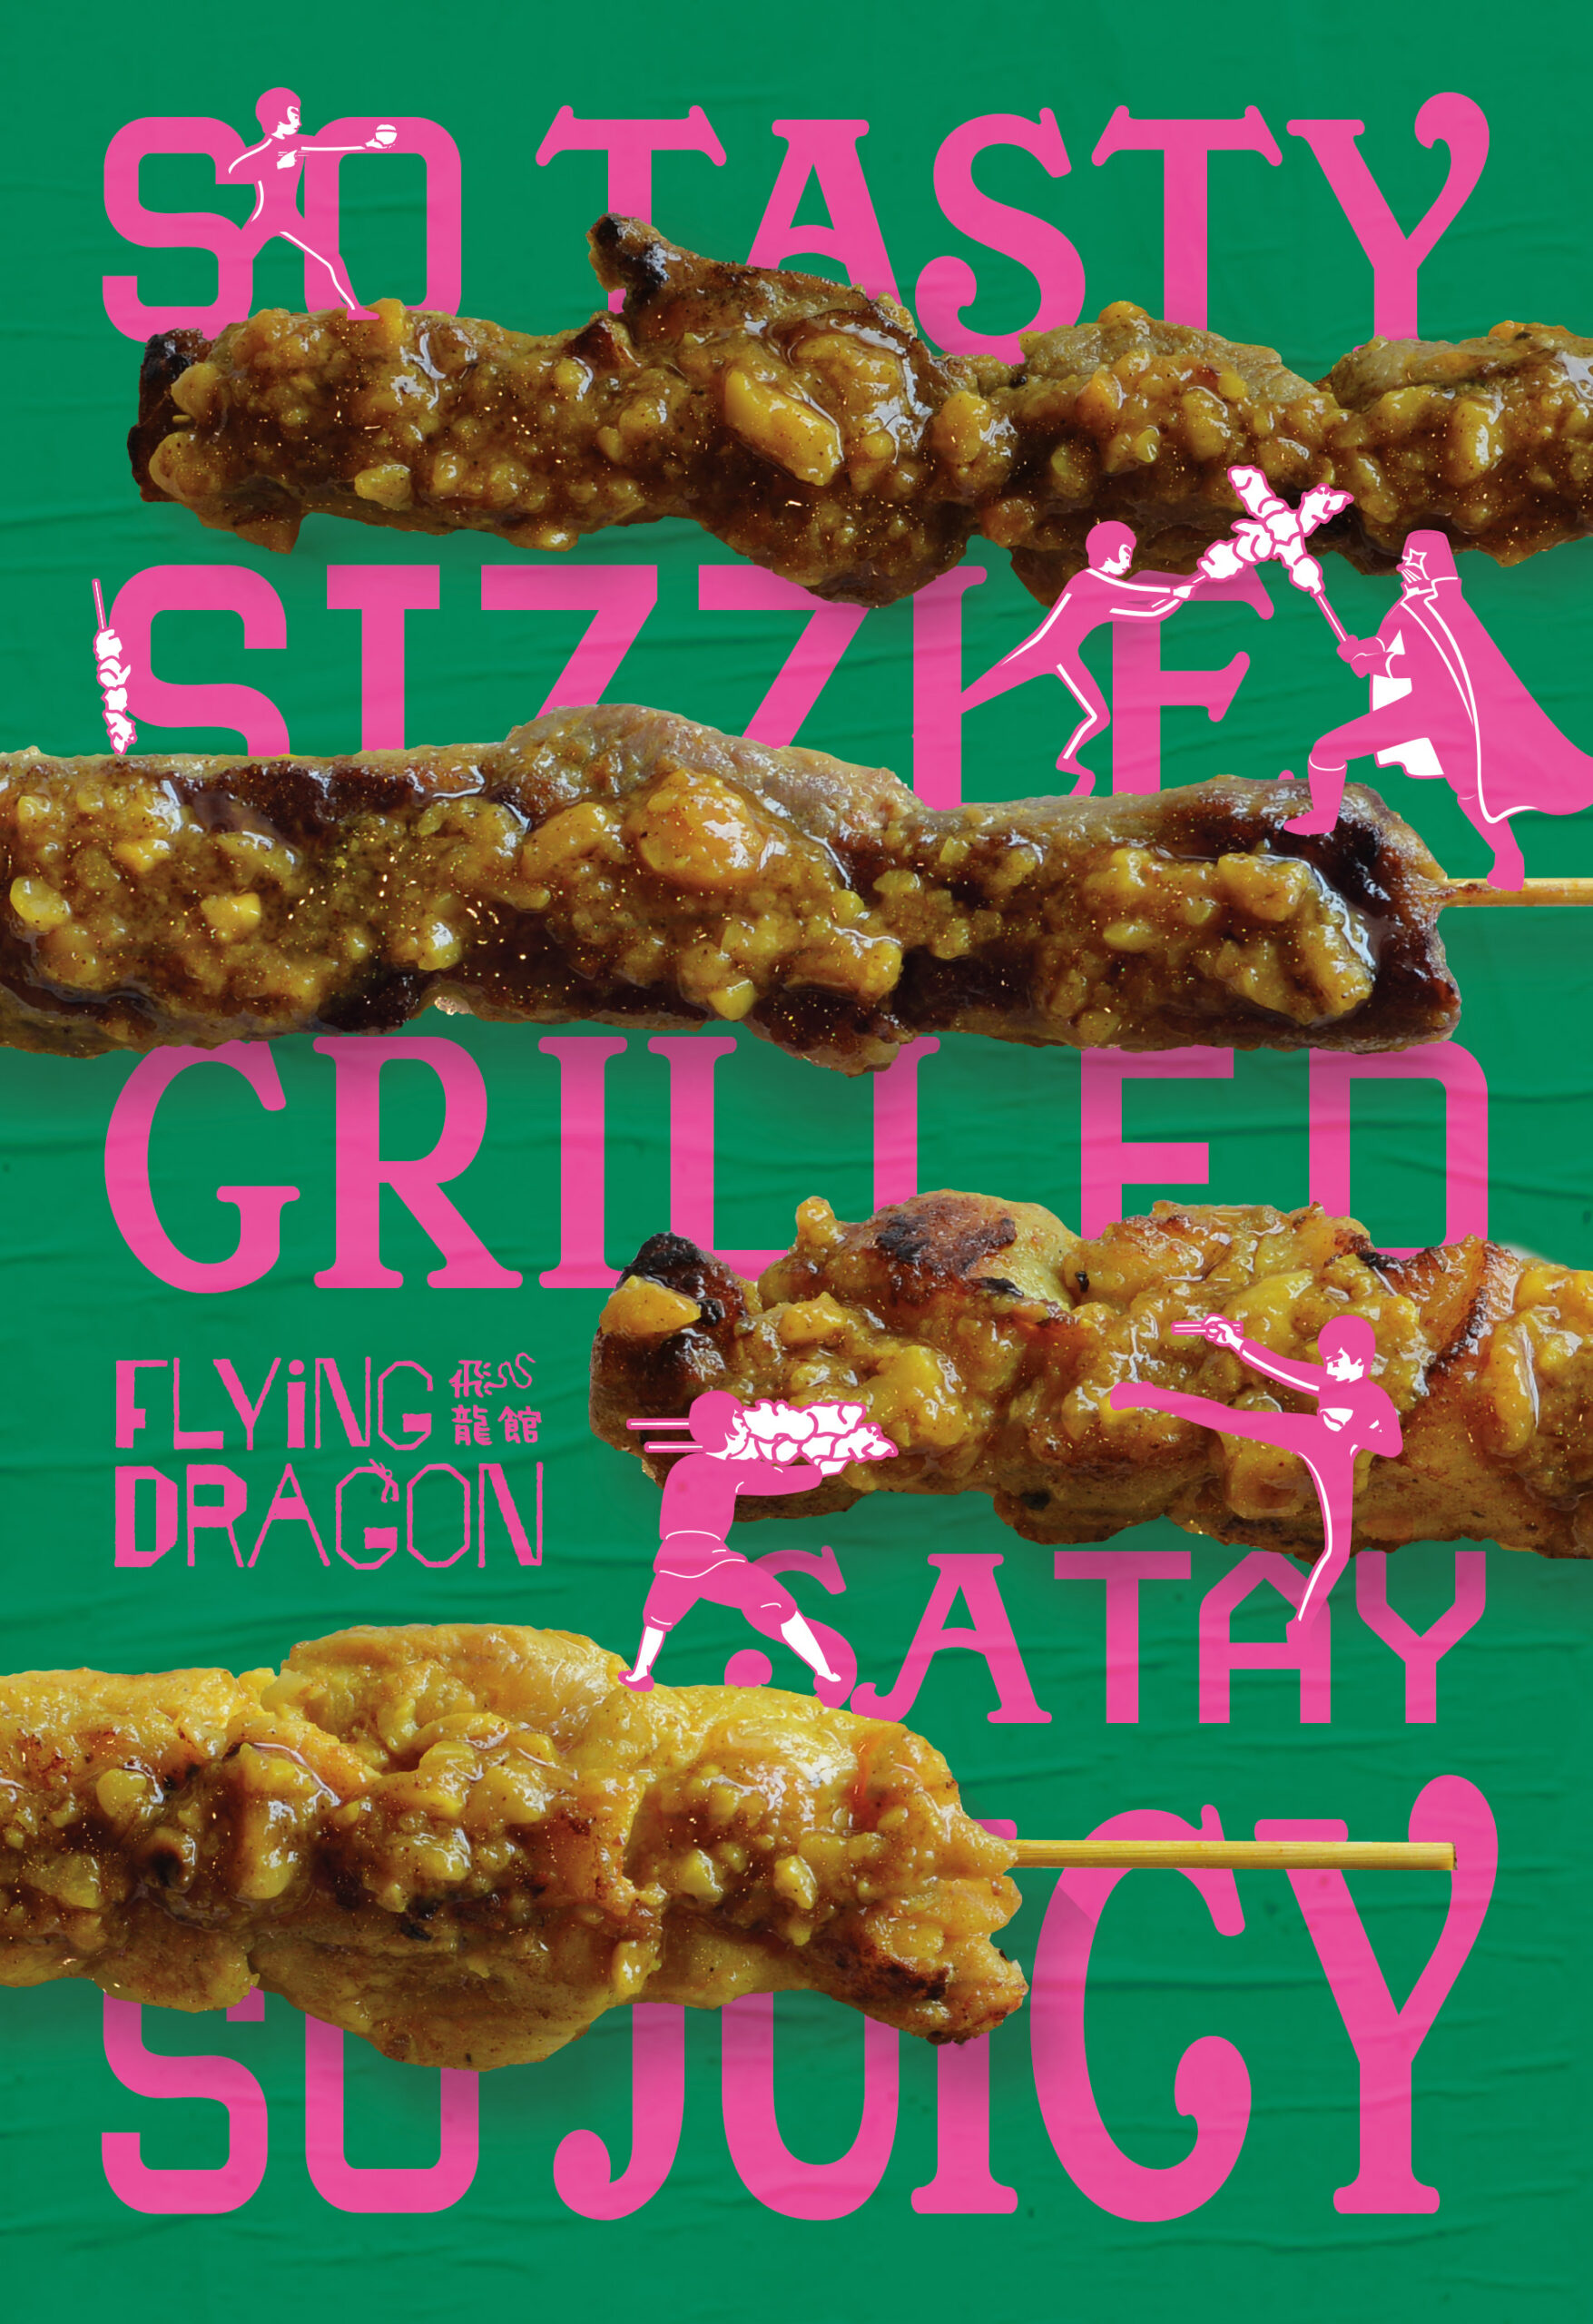 Skewers Poster for Flying Dragon